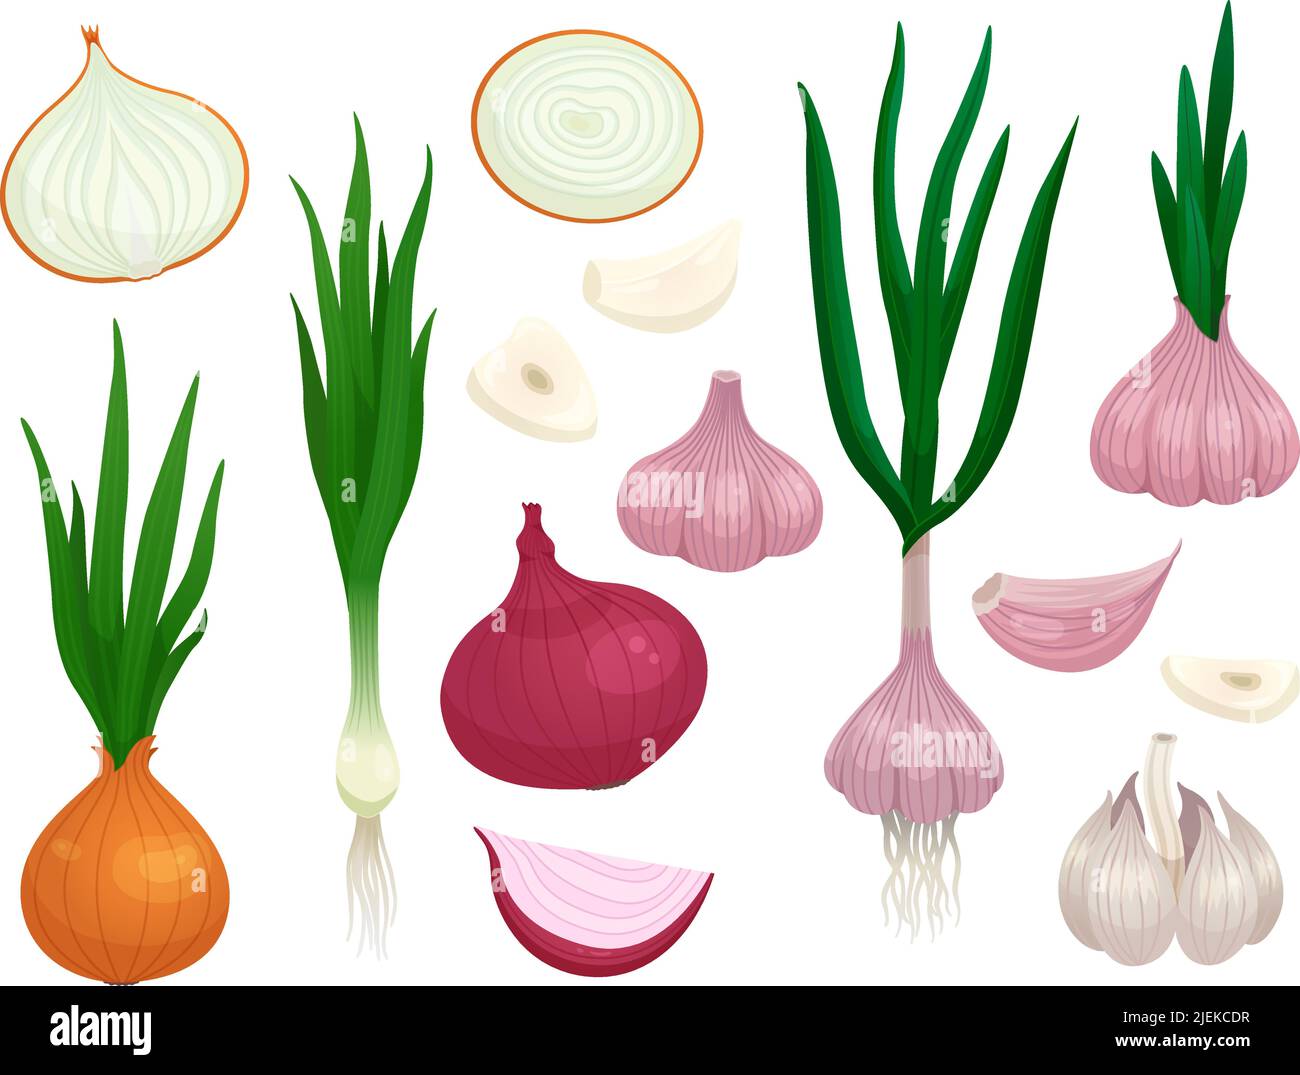 Garlic and onion veggies. Organic vegetables spice, isolated cartoon green onions, raw food ingredients slices. Fresh market, cooking racy vector Stock Vector